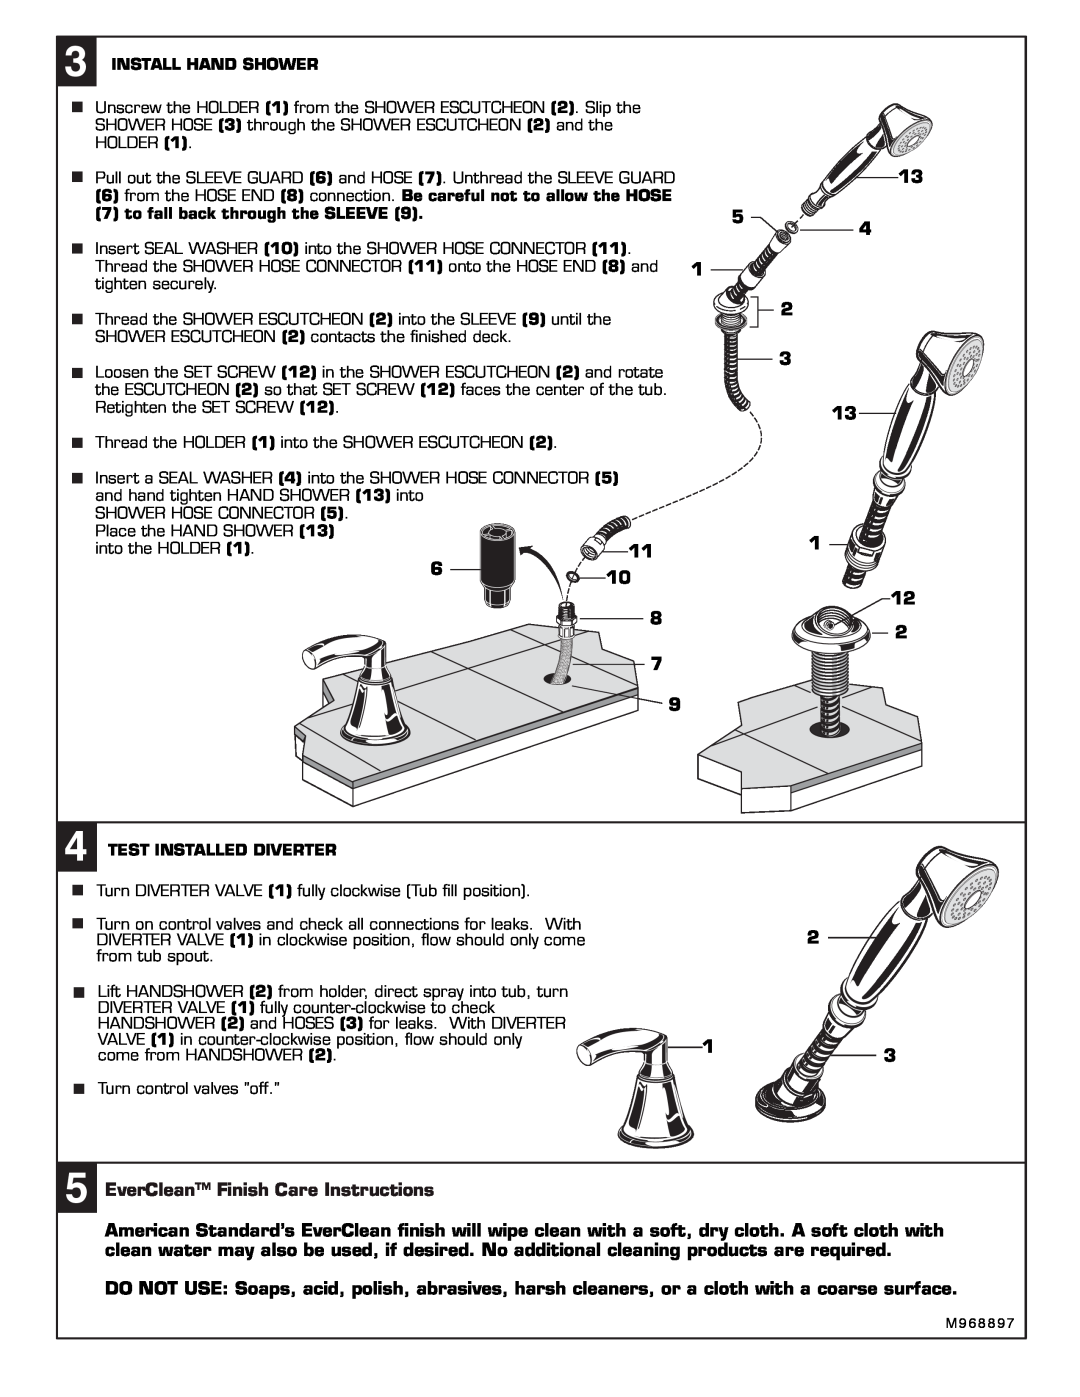 American Standard T038.900 installation instructions EverClean Finish Care Instructions 